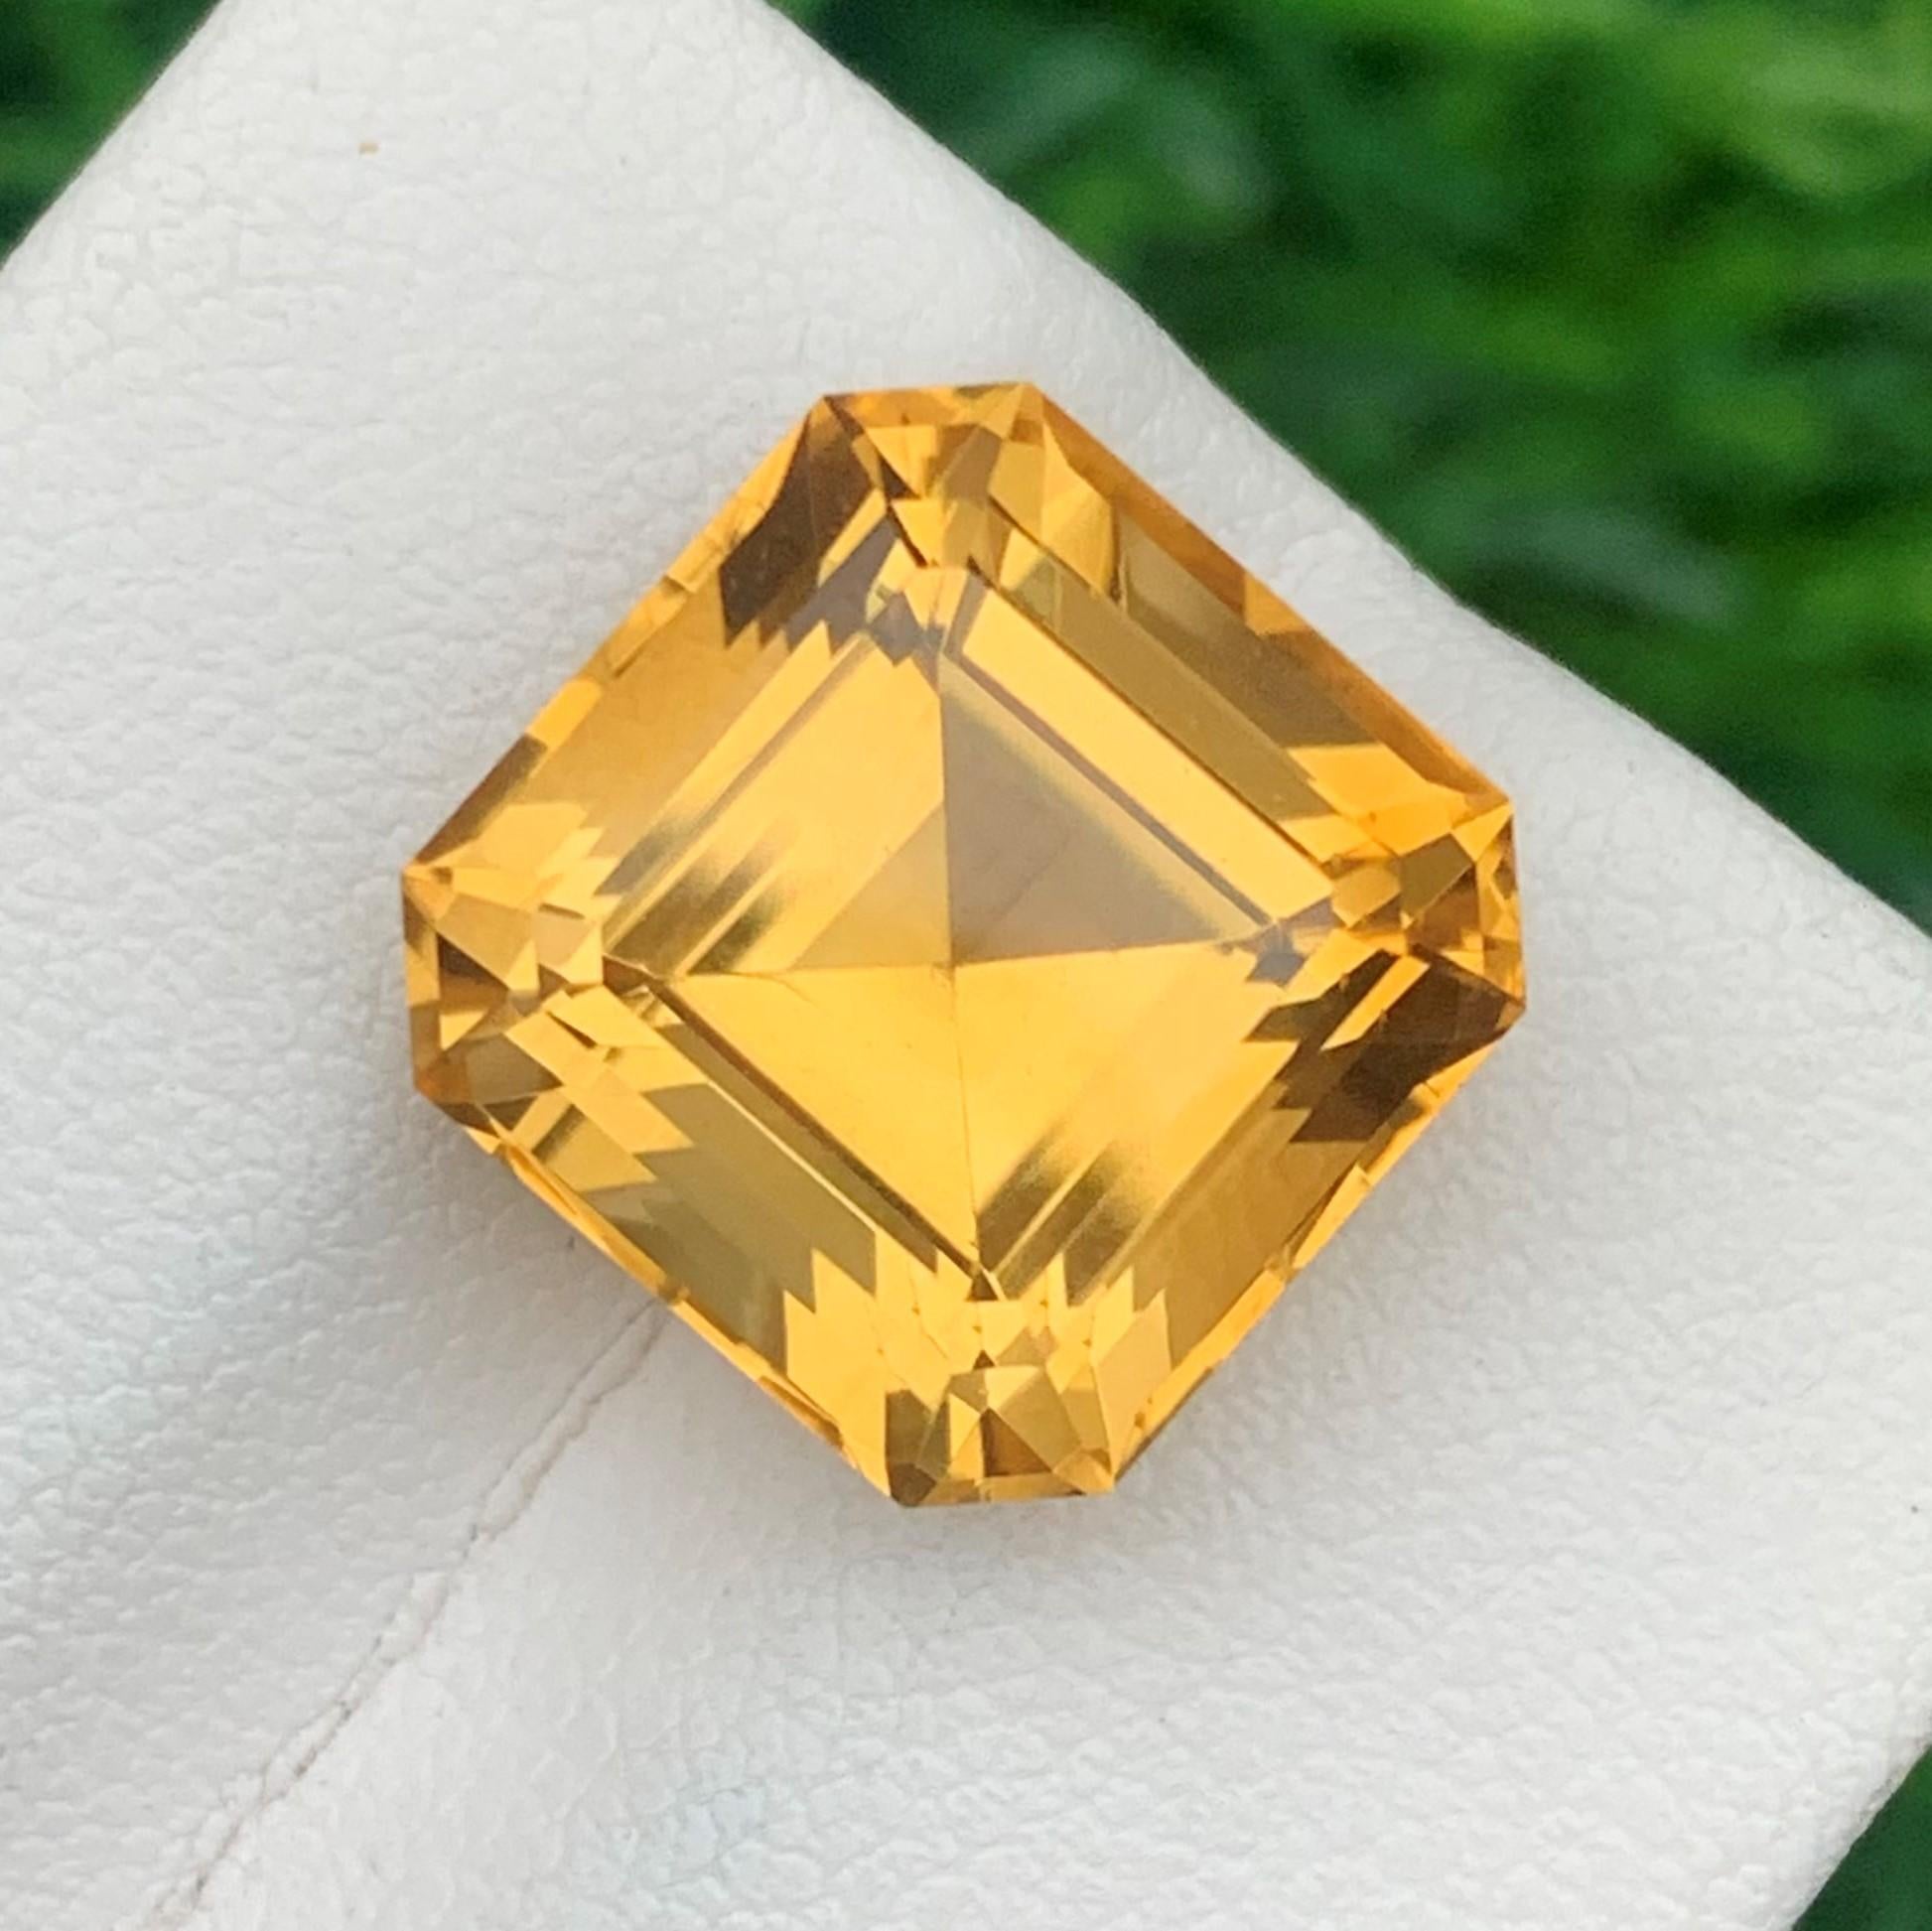 Gemstone Type : Citrine
Weight : 9.80 Carats
Dimensions : 12.4x12.4x9.8 mm
Clarity : Loupe Clean
Origin : Brazil
Color: Yellow
Shape: Square
Cut: Asscher
Certificate: On Demand
Month: November
.
The Many Healing Properties of Citrine
Increase